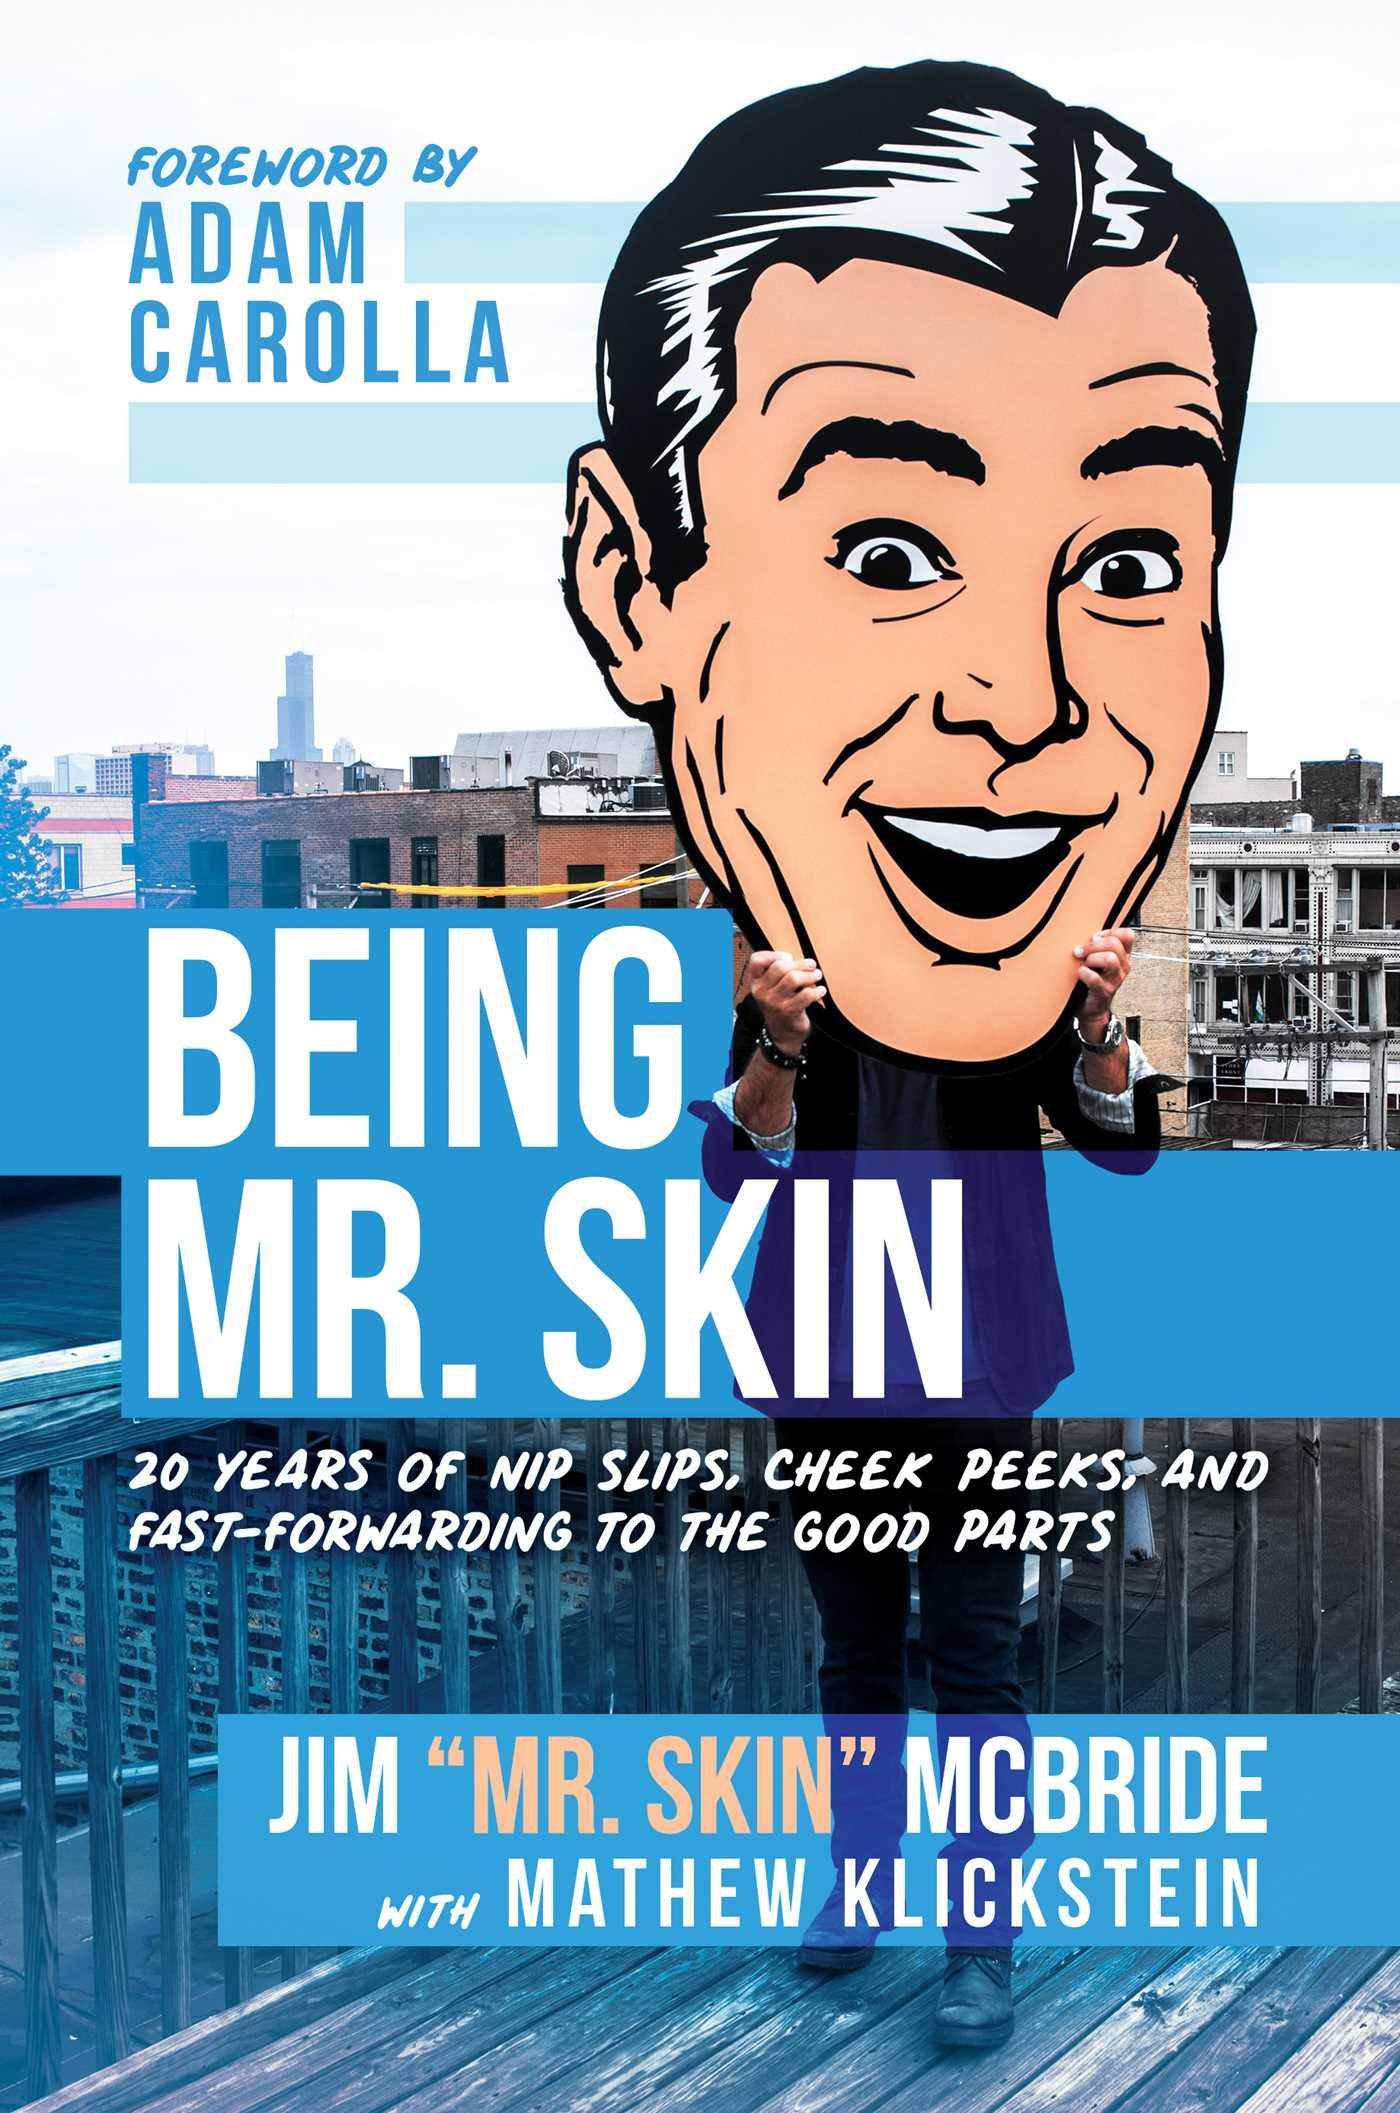 The cover of Being Mr. Skin